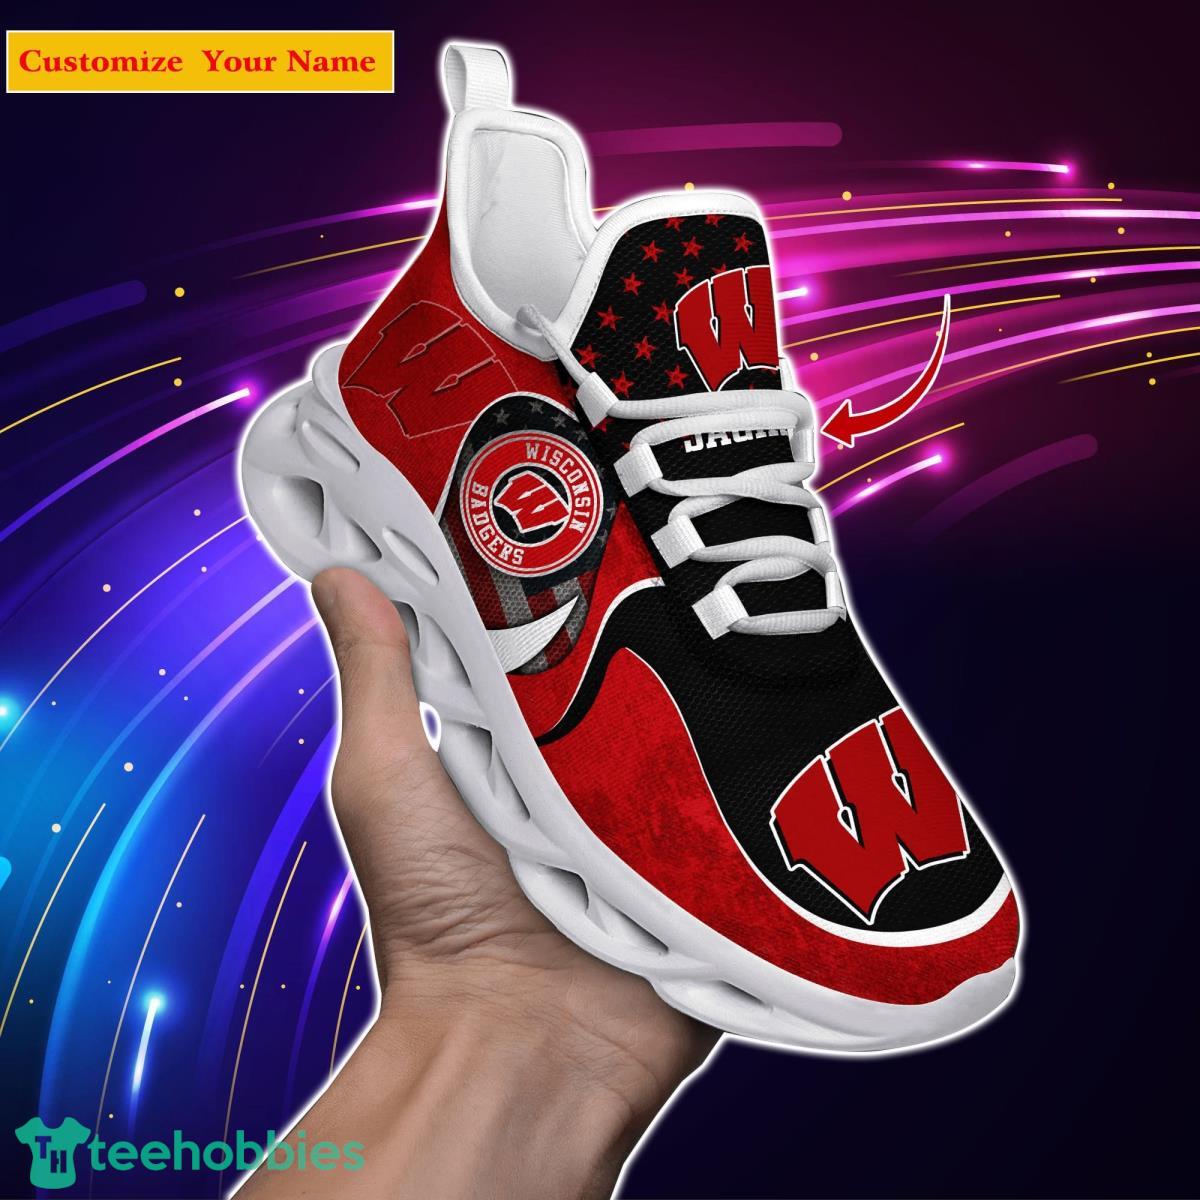 Wisconsin Badgers NCAA1 Custom Name Max Soul Shoes Special Gift For Men Women Fans Product Photo 1